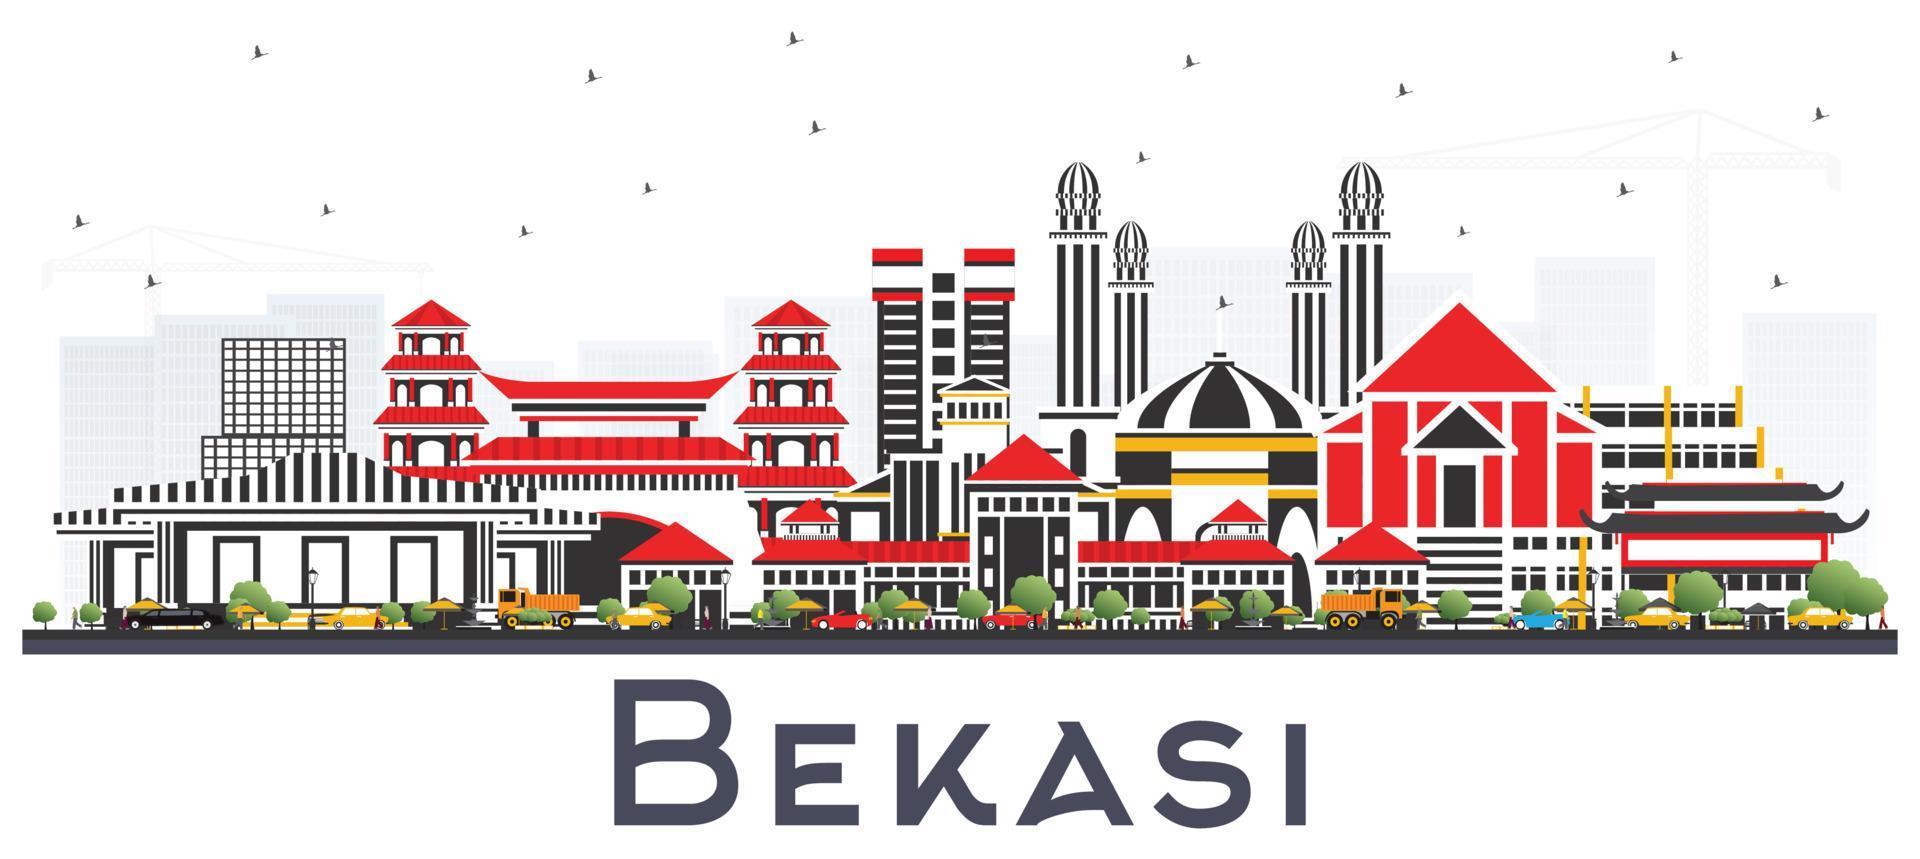 Bekasi Indonesia City Skyline with Color Buildings Isolated on White. vector